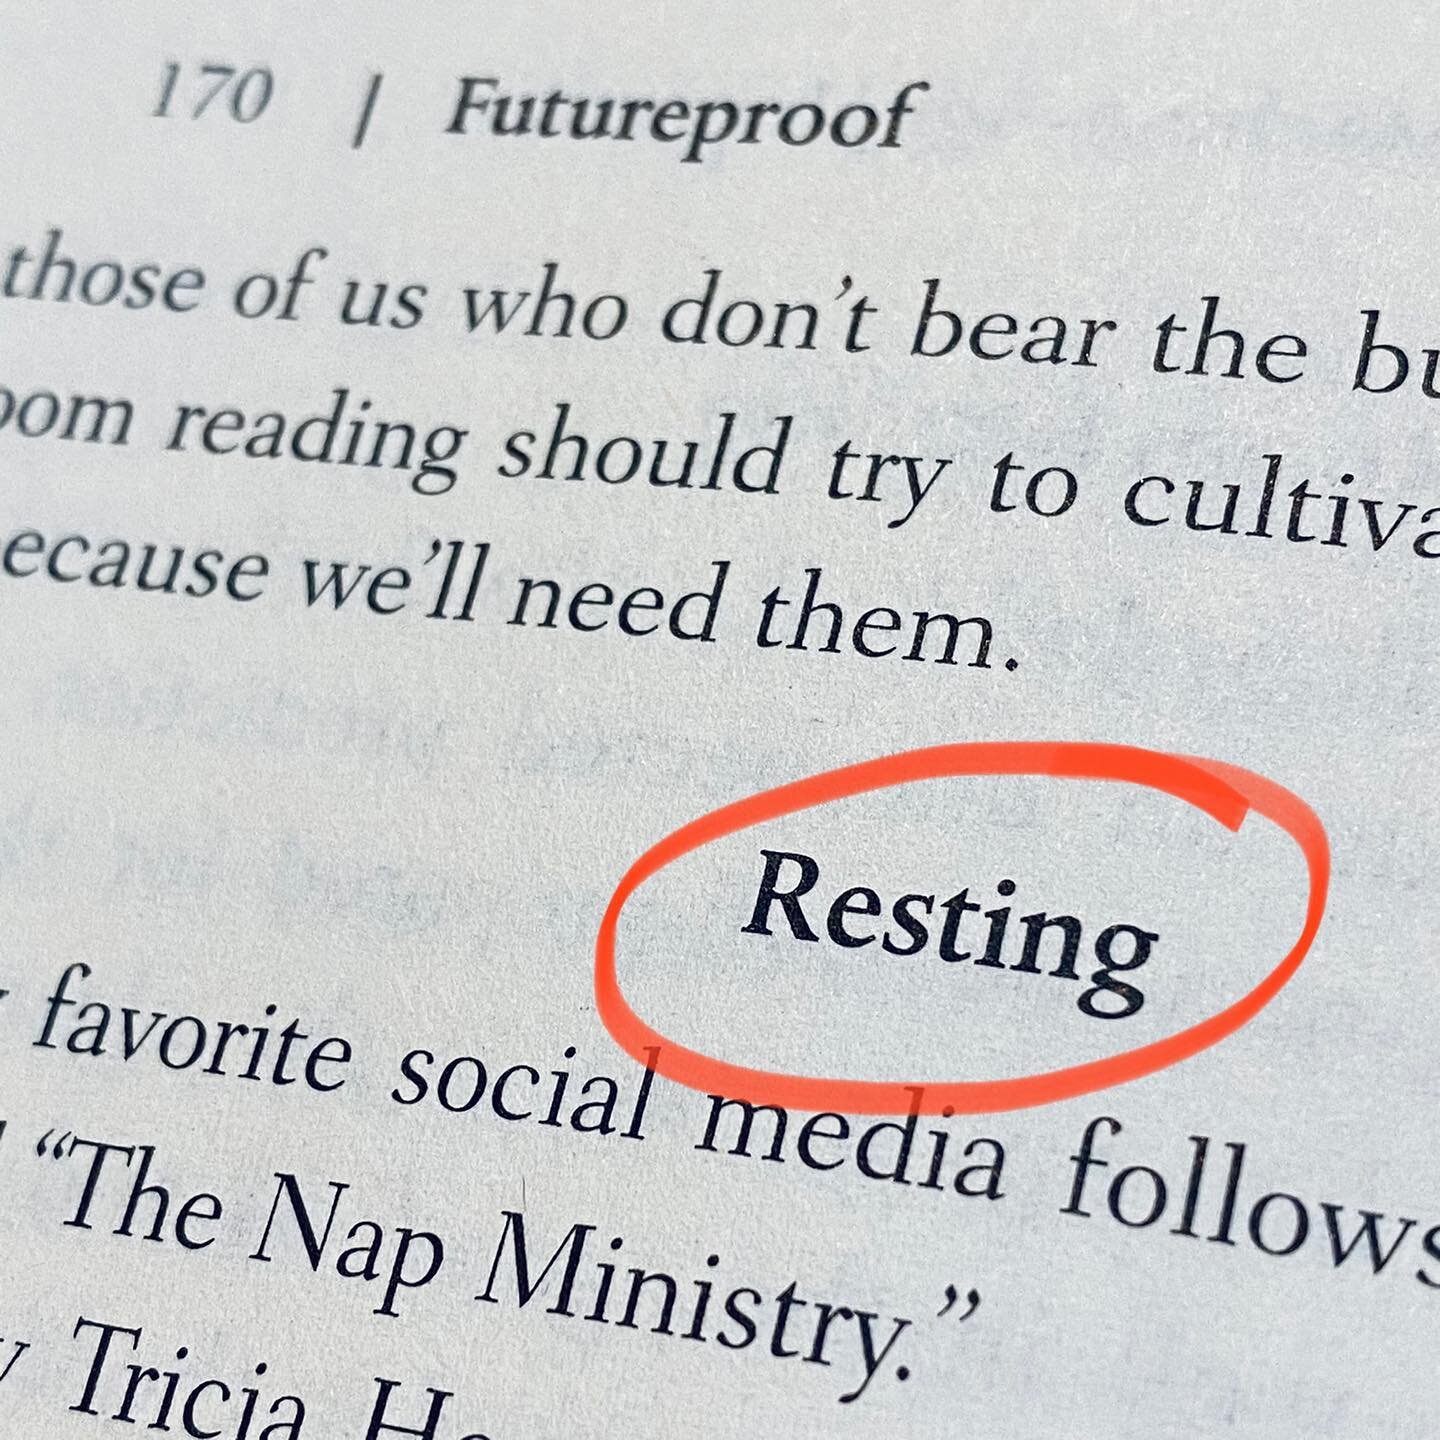 Take more Naps.  I&rsquo;m loving Kevin Roose&rsquo;s insight in his new novel, Futureproof: 9 Rules for Humans in the Age of Automation, about the importance of sleep and napping to drive success.  In the old economy, our value was mostly predicated